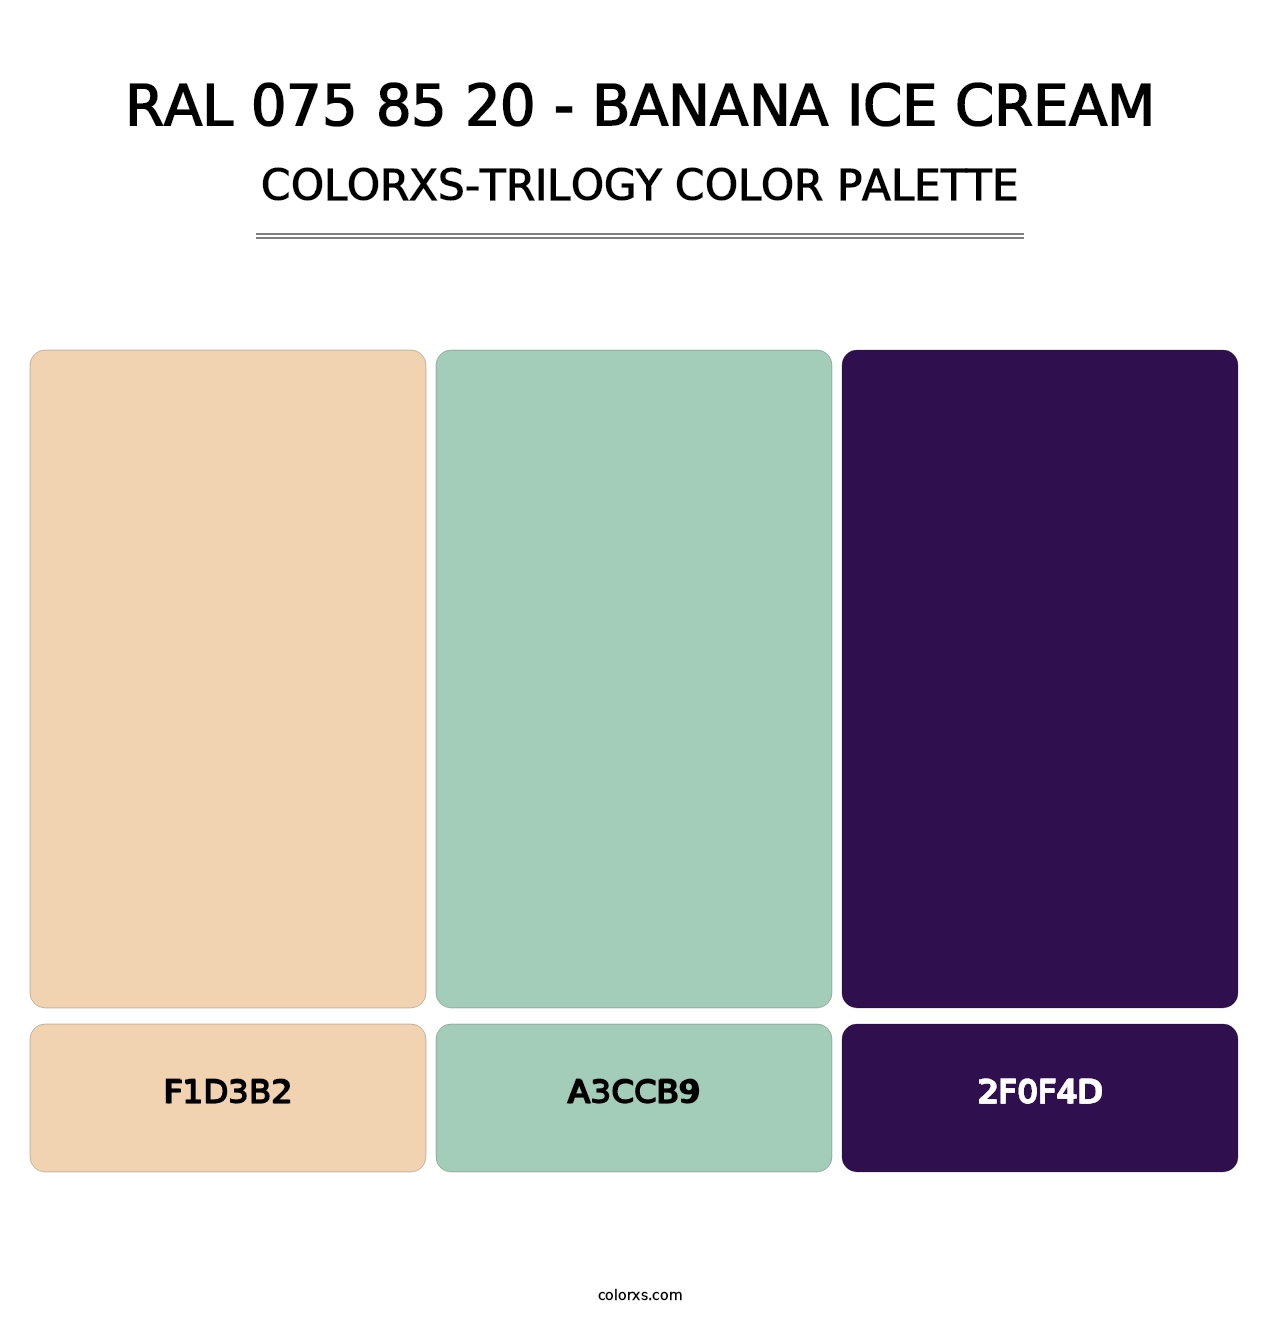 RAL 075 85 20 - Banana Ice Cream - Colorxs Trilogy Palette